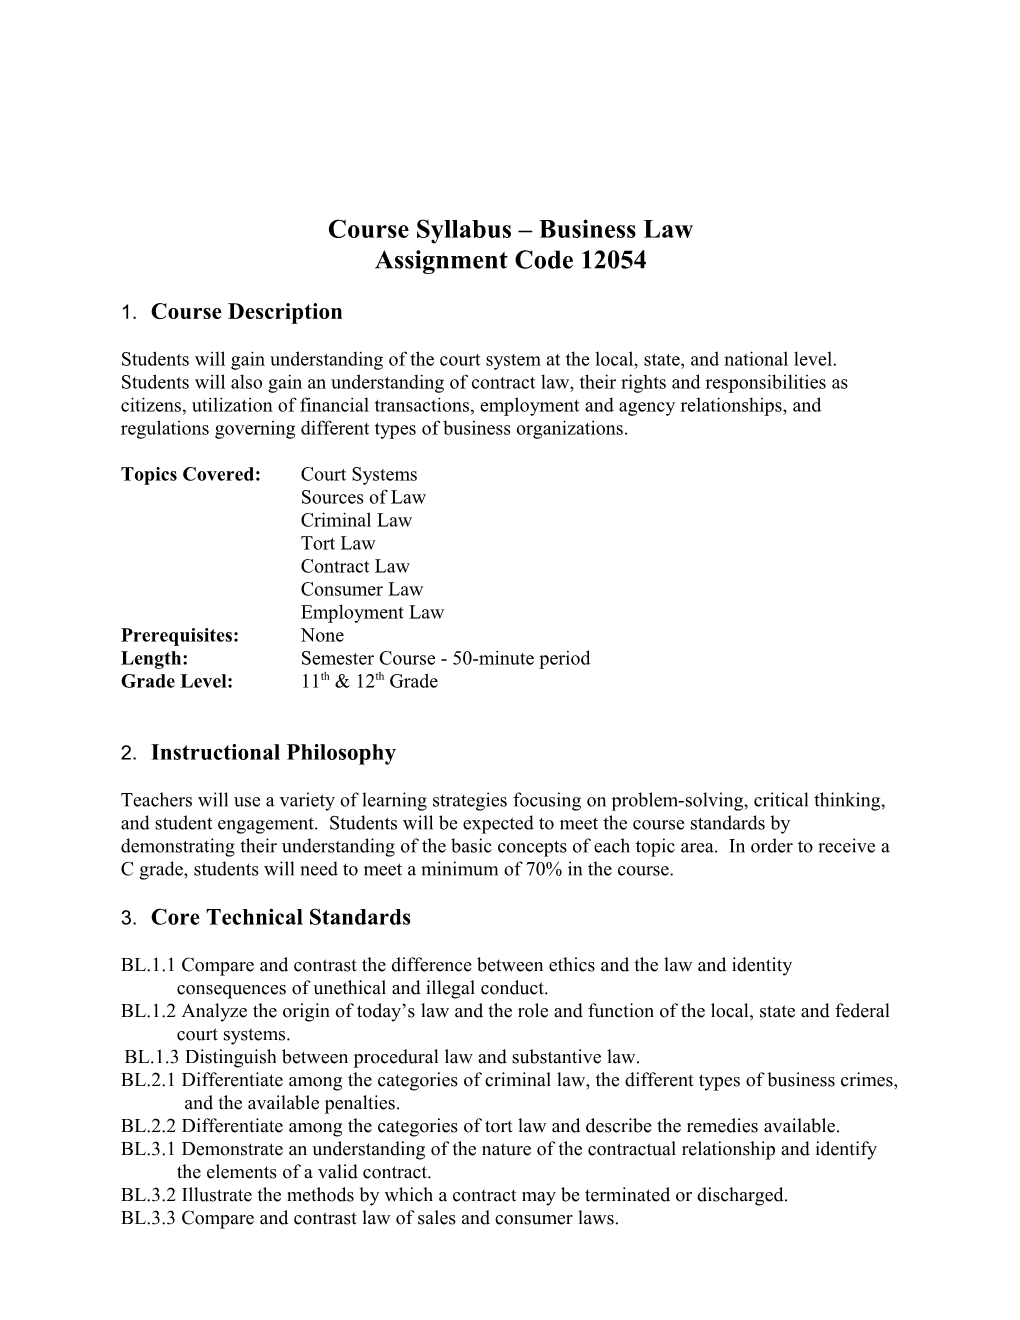 Course Syllabus Business Law